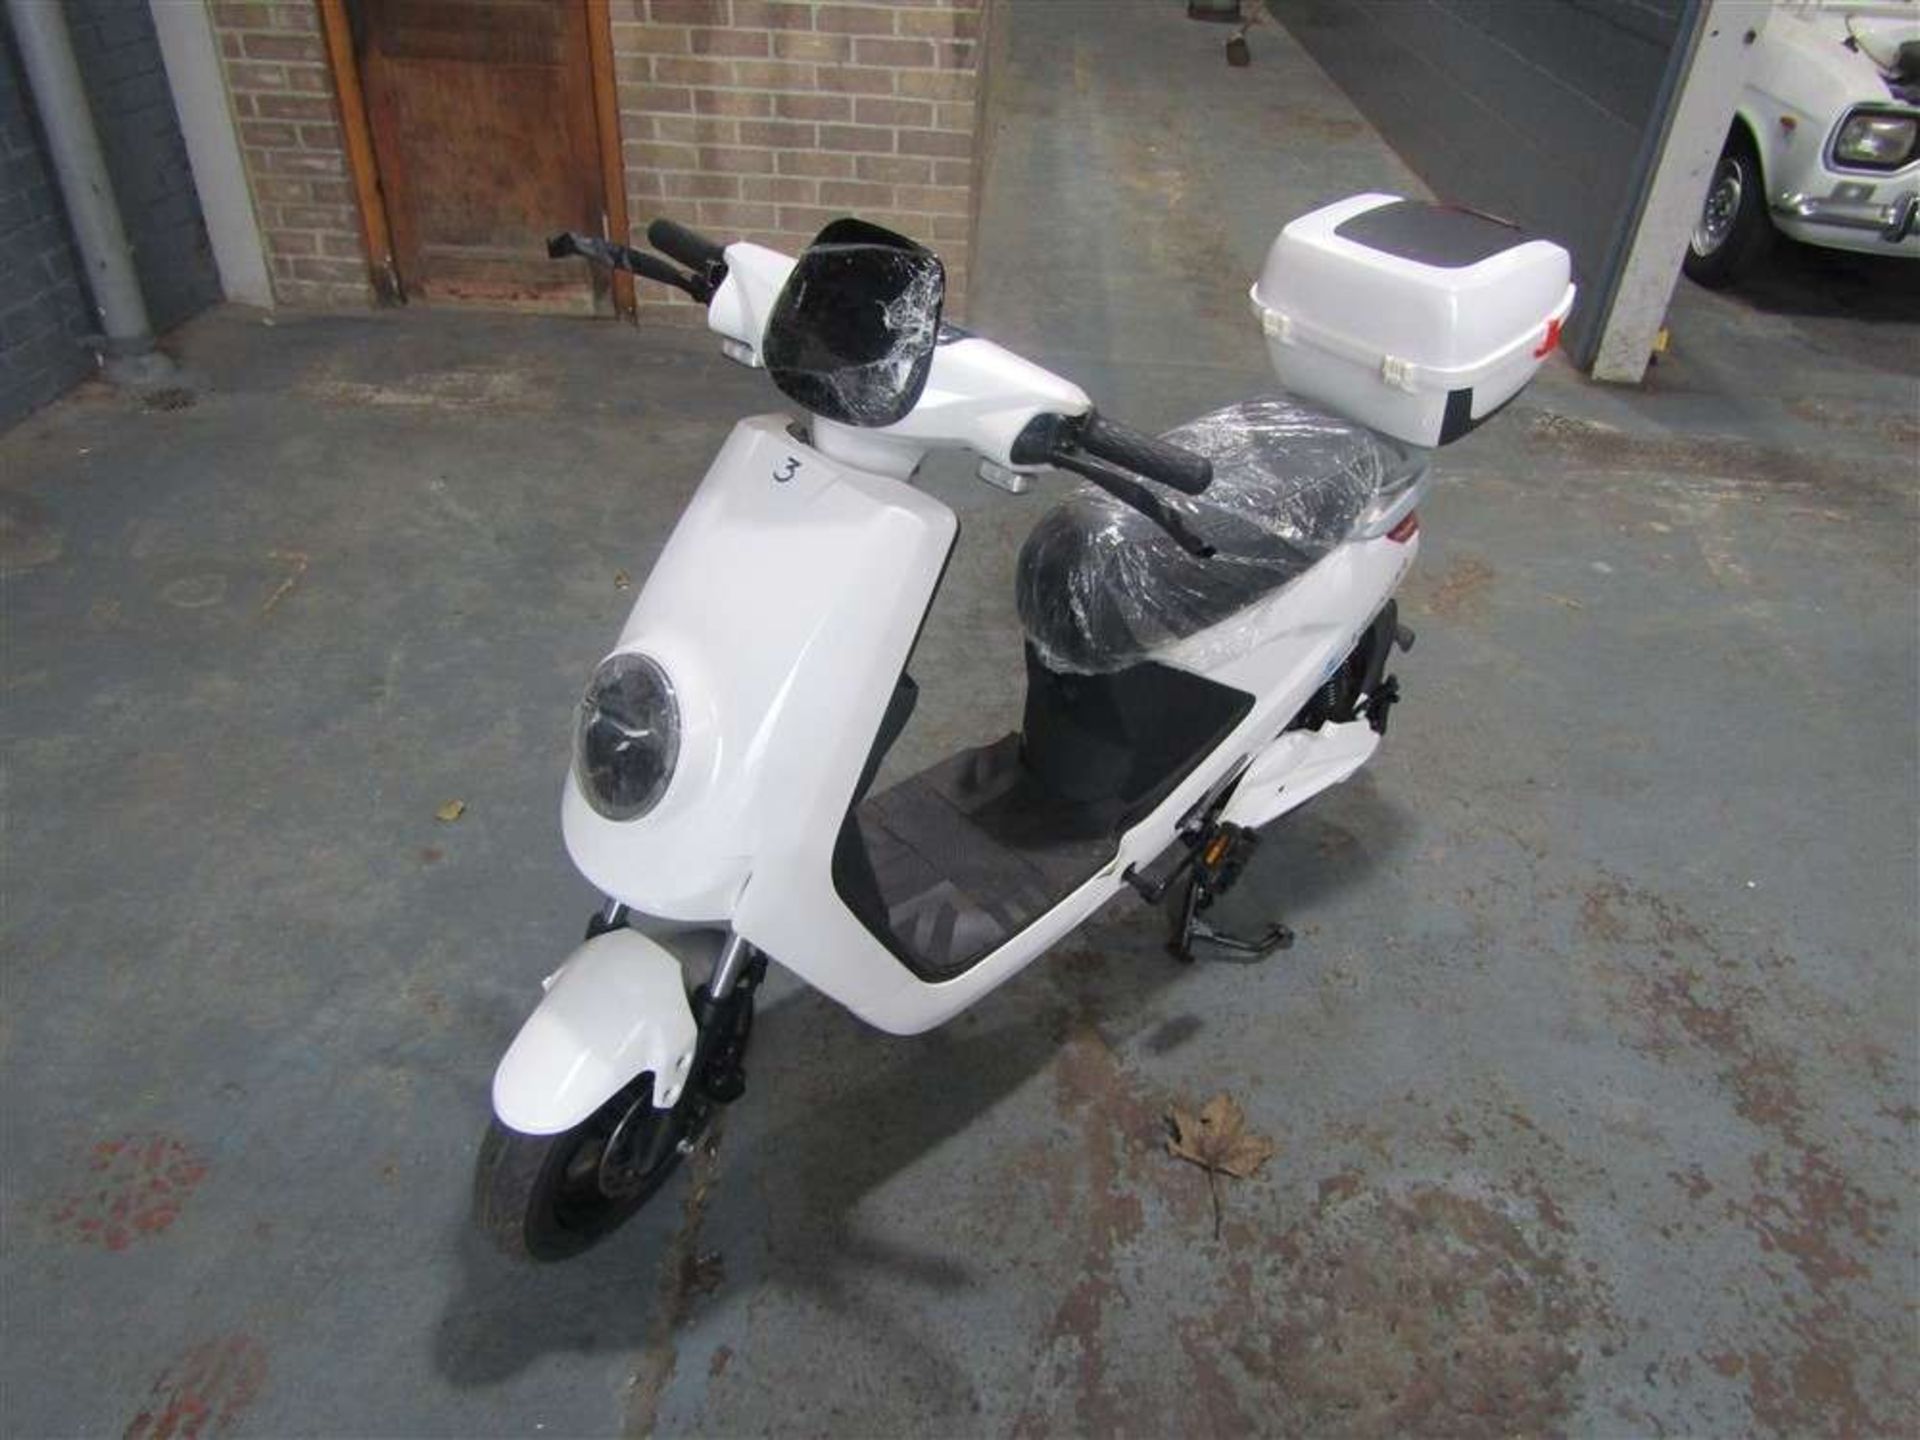 Erider 18 Electric Cycle 250W